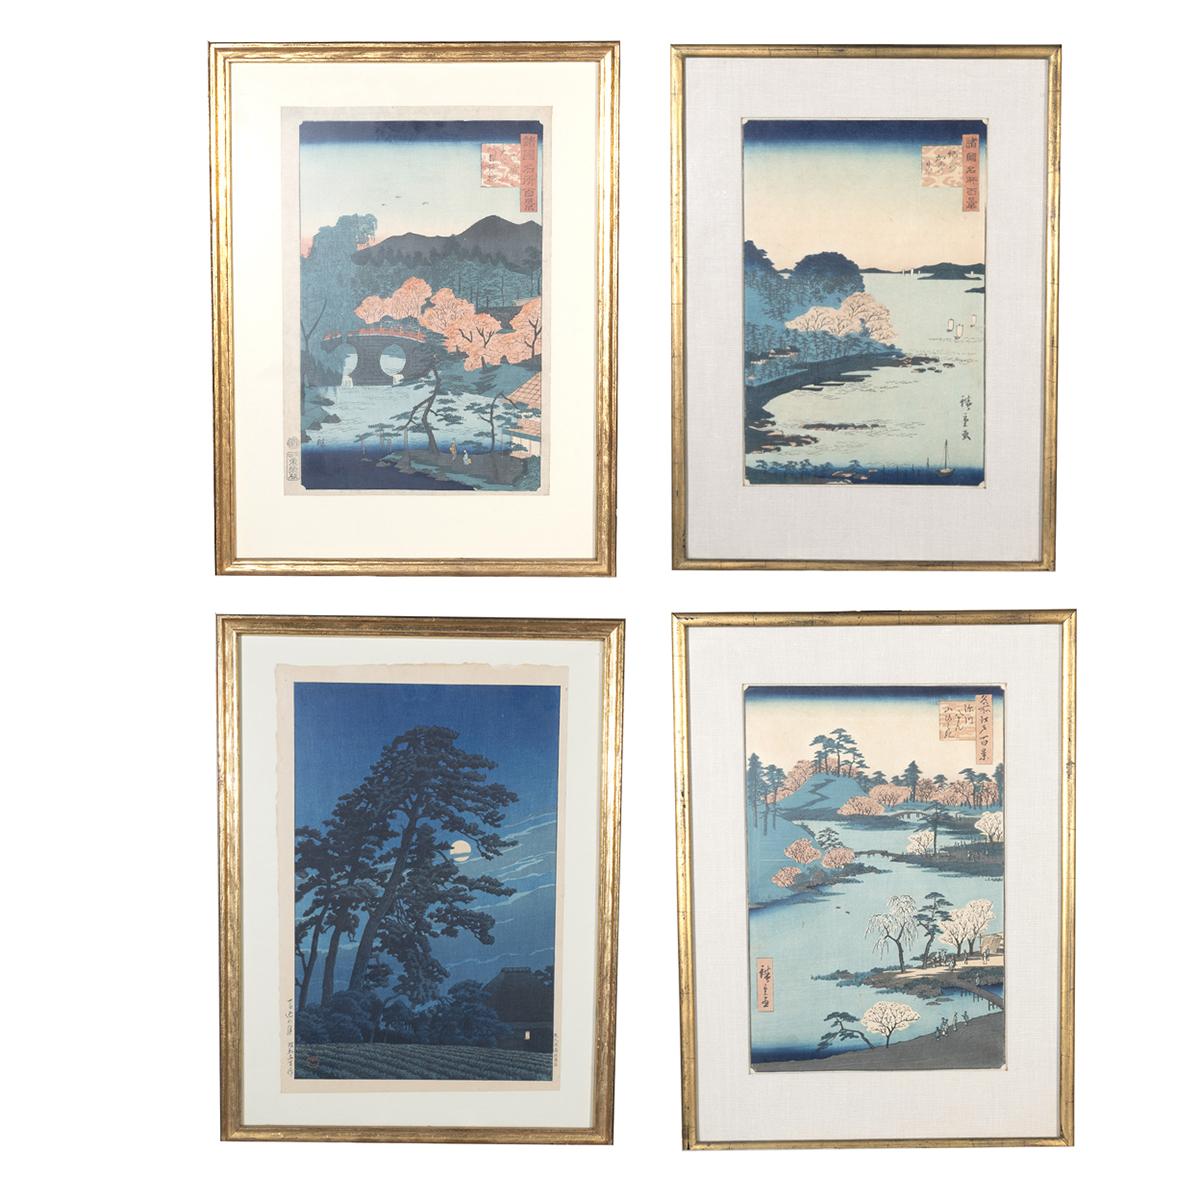 February Gallery Auction
Friday, February 16th | 10 a.m.
Group of Four Framed Japanese Woodblock Prints
Estimate: $400 / $600
#michaansauctions #auctions #michaans #galleryauction #asianart #japaneseart #japaneseprints #woodblock #woodblockprints #japanesewoodblockprints